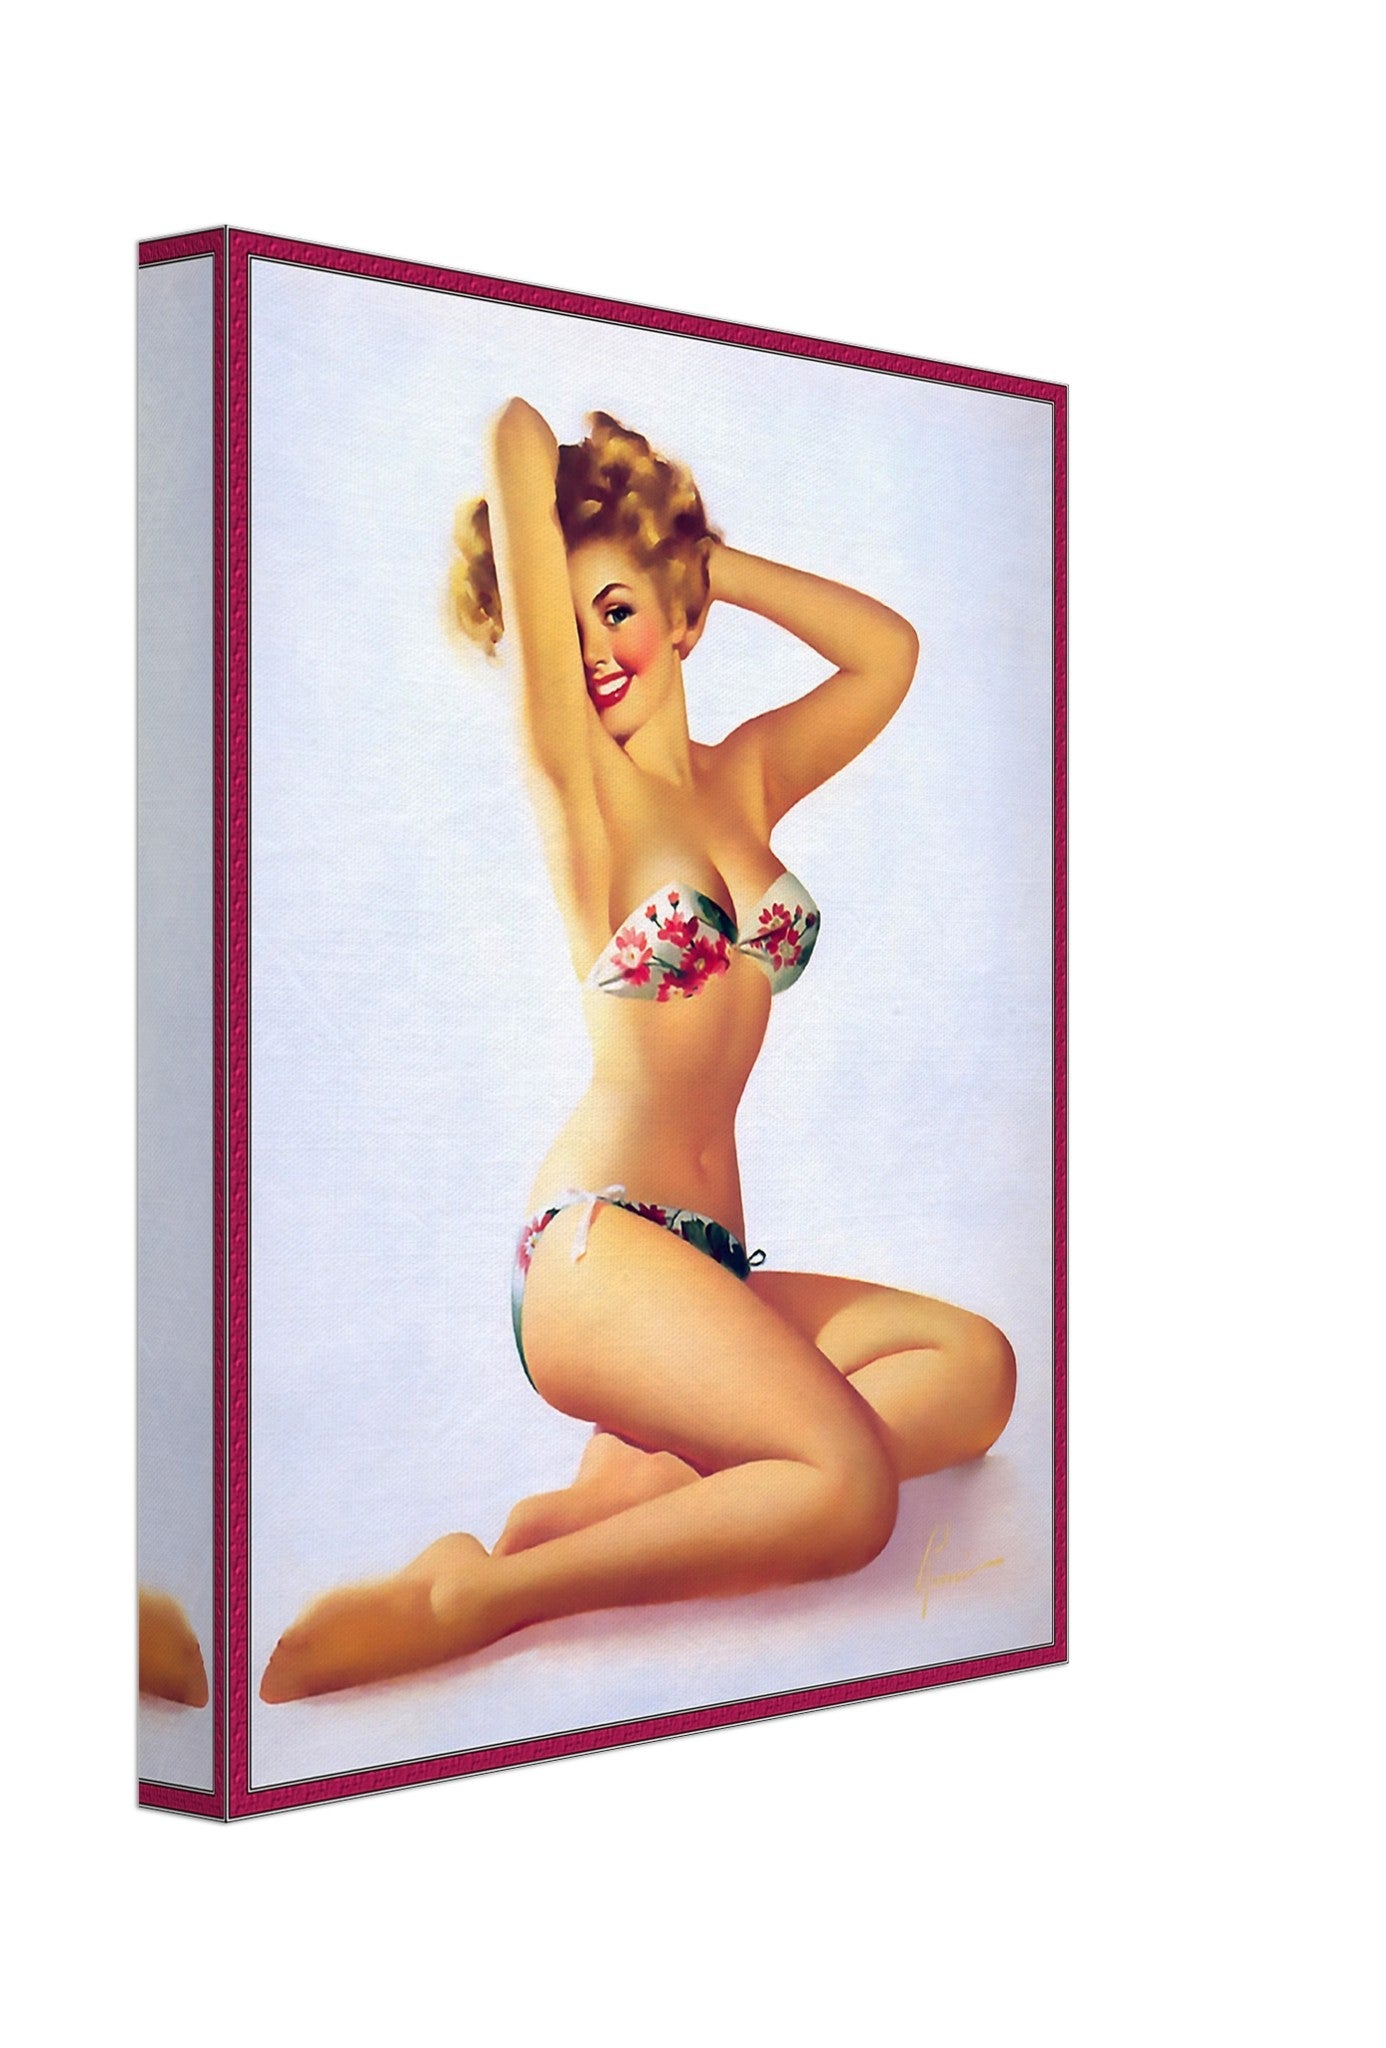 Vintage Pin Up Girl Canvas, Red Flowers On Bikini - Edward Runci - Vintage Art - Retro Pin Up Girl Canvas Print - Late 1940'S - 1950'S - WallArtPrints4U